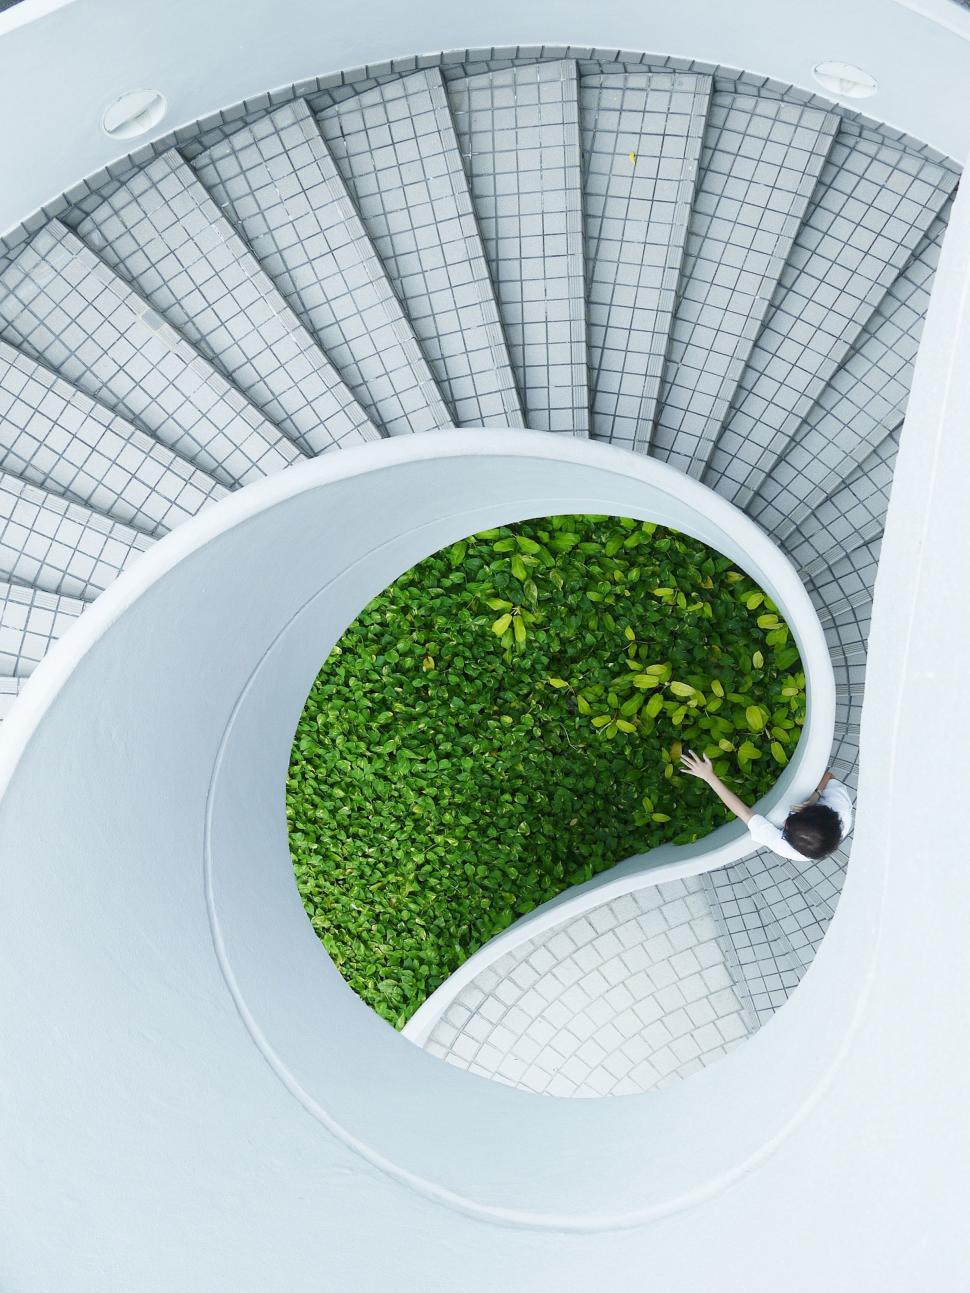 Free Image of Spiral Staircase Overgrown With Grass 